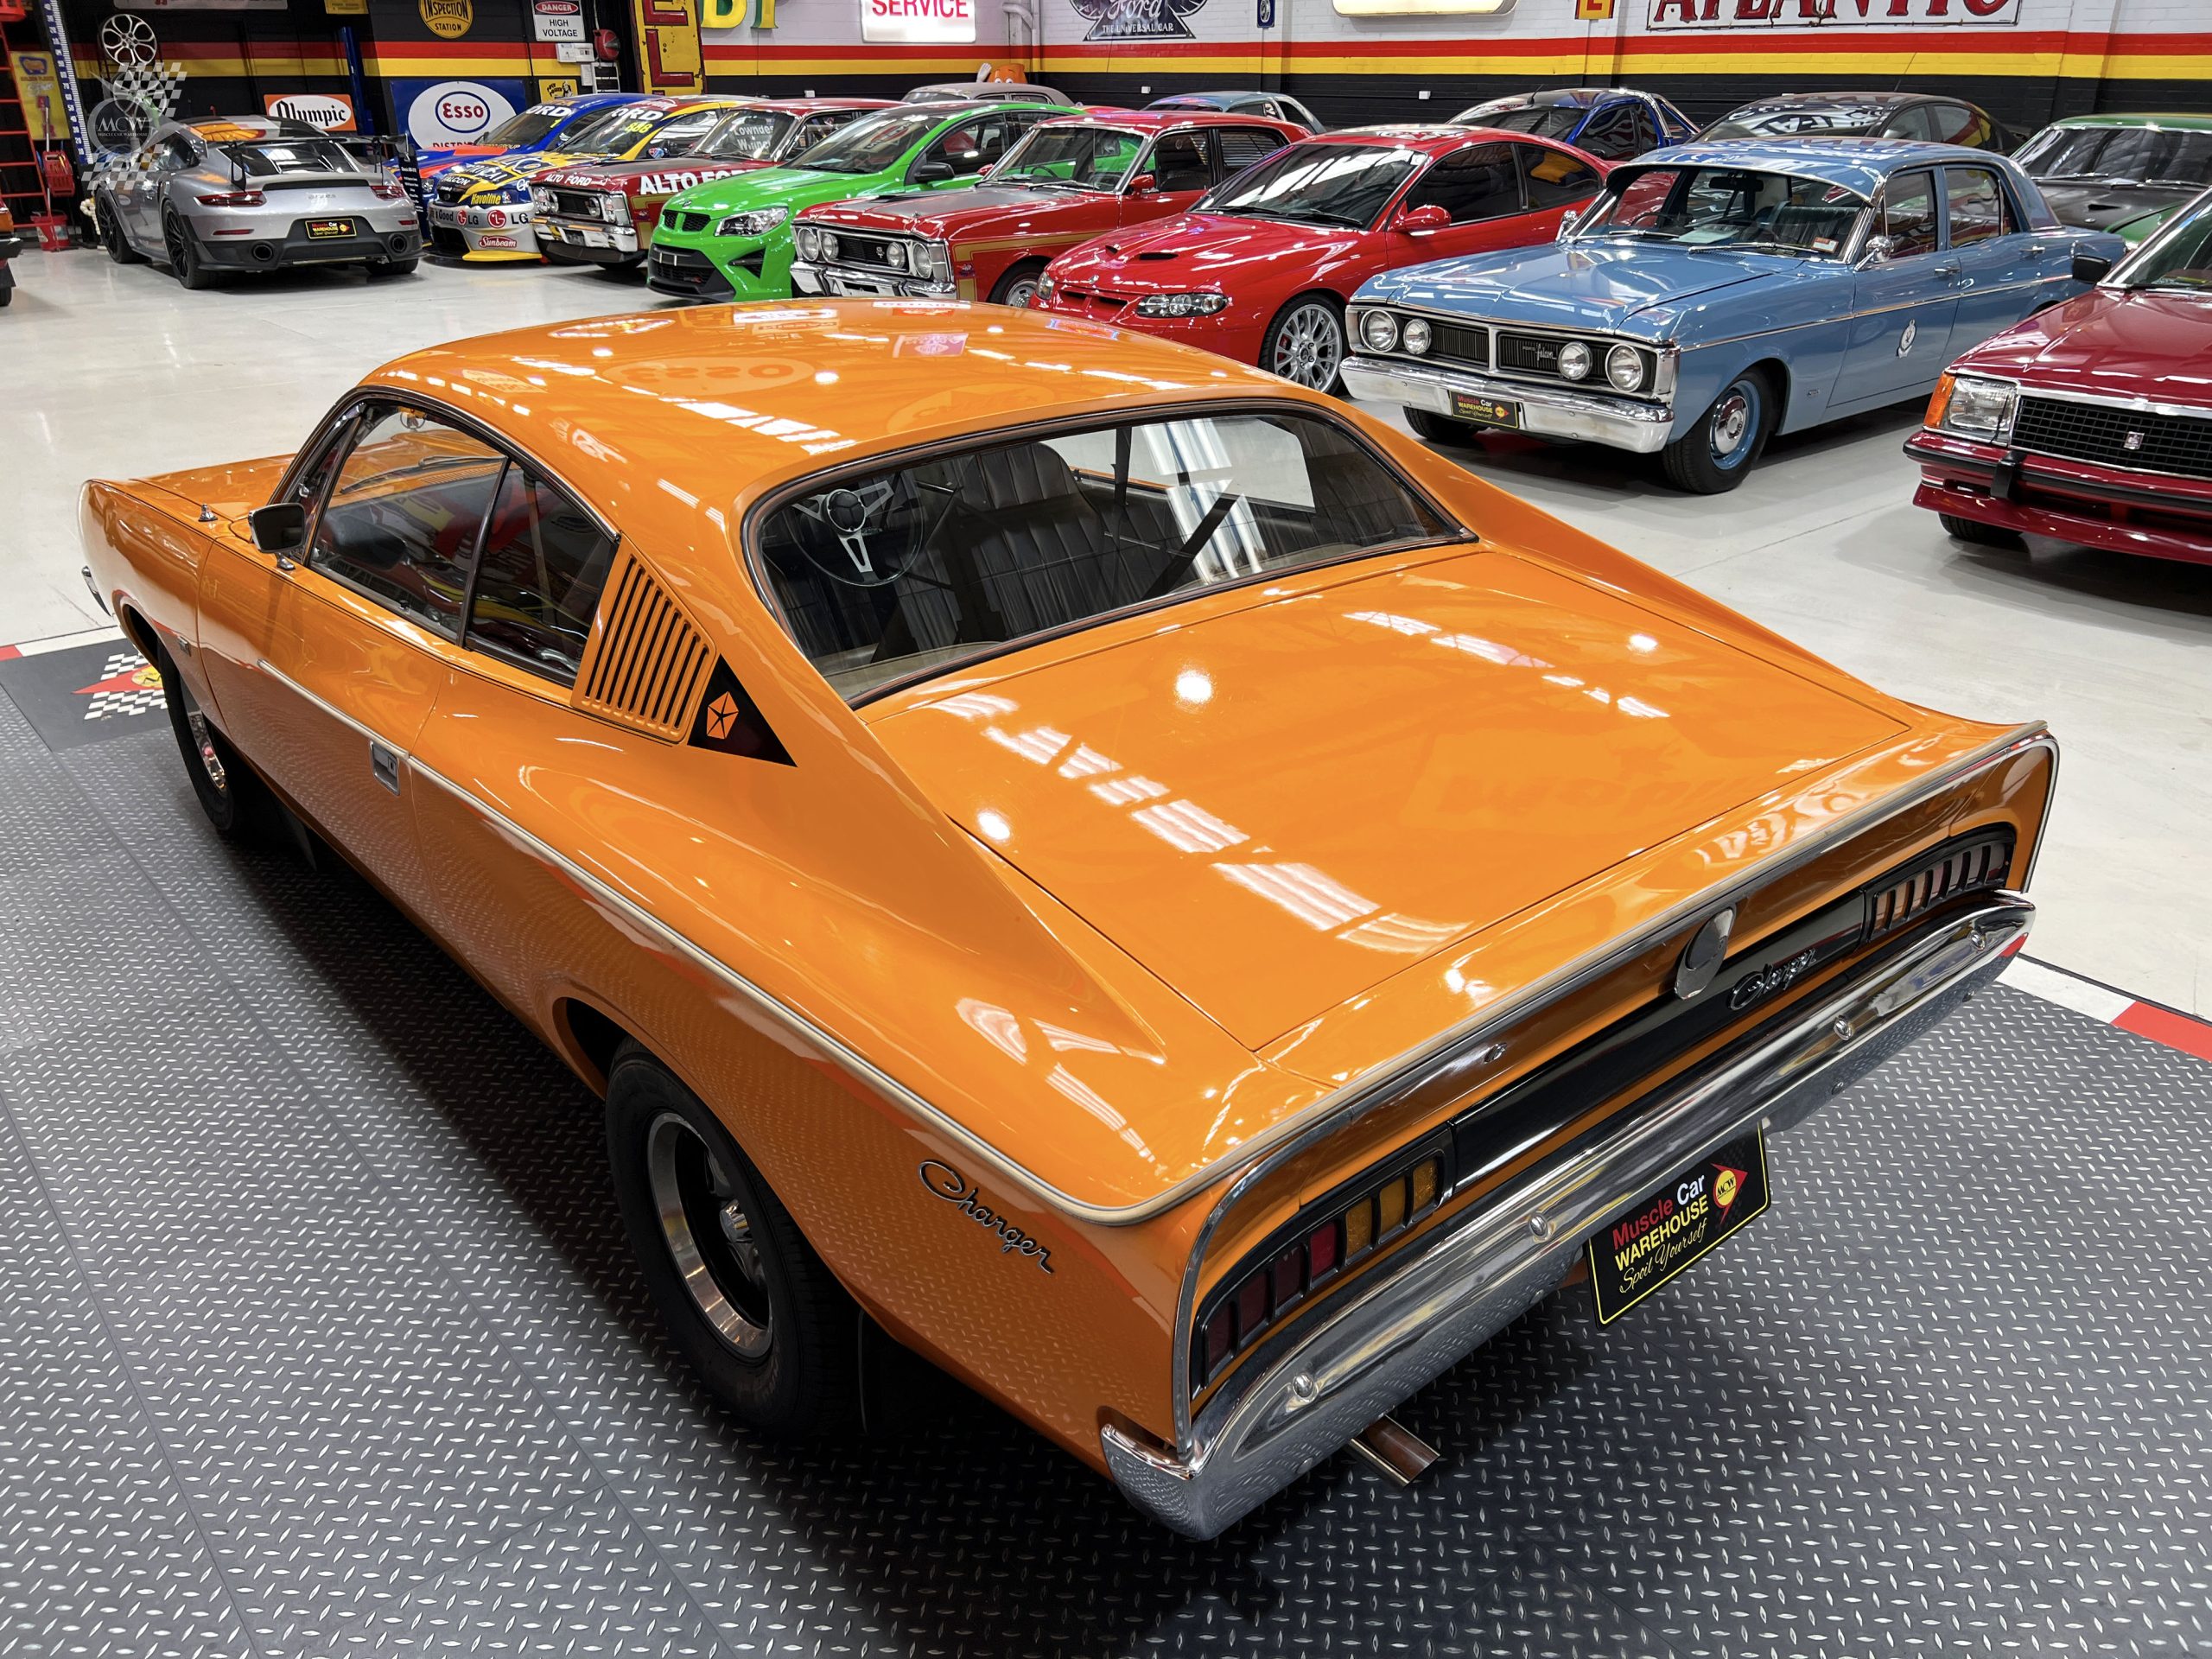 1972 Valiant Charger VH Coupe - Muscle Car Warehouse